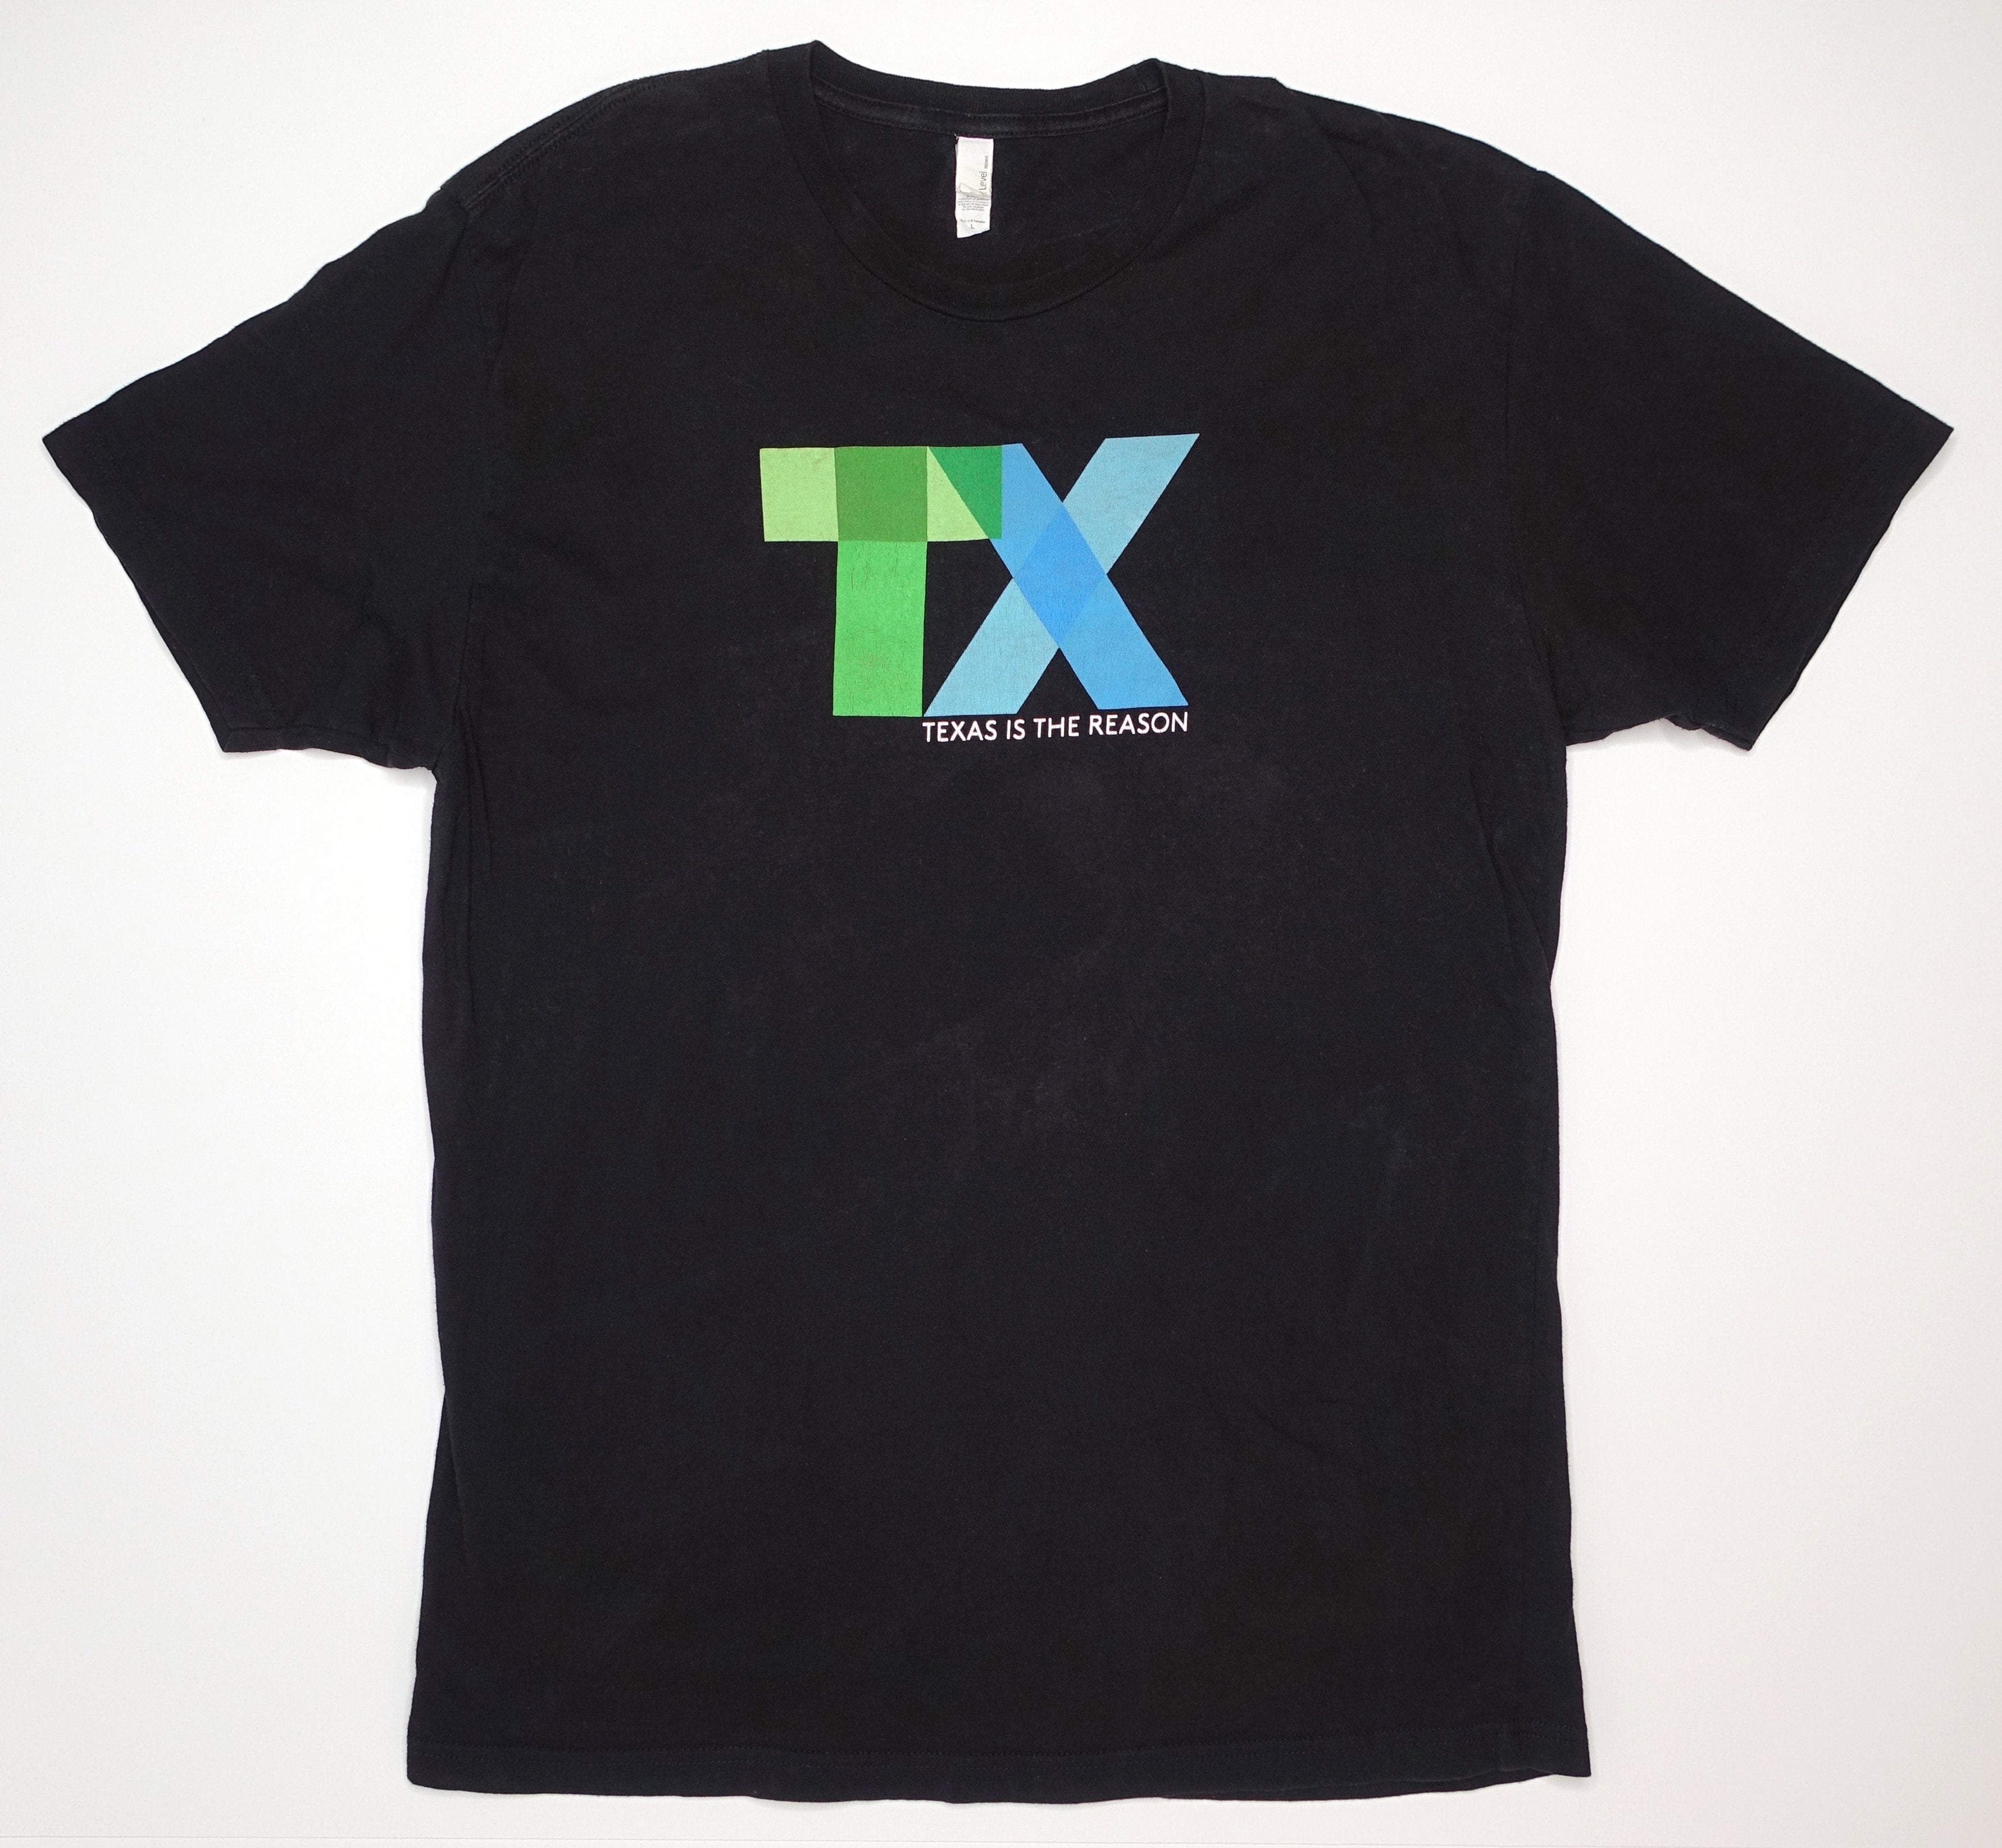 Texas Is The Reason - TX Multiply 2006 Reunion Tour Shirt Size Large